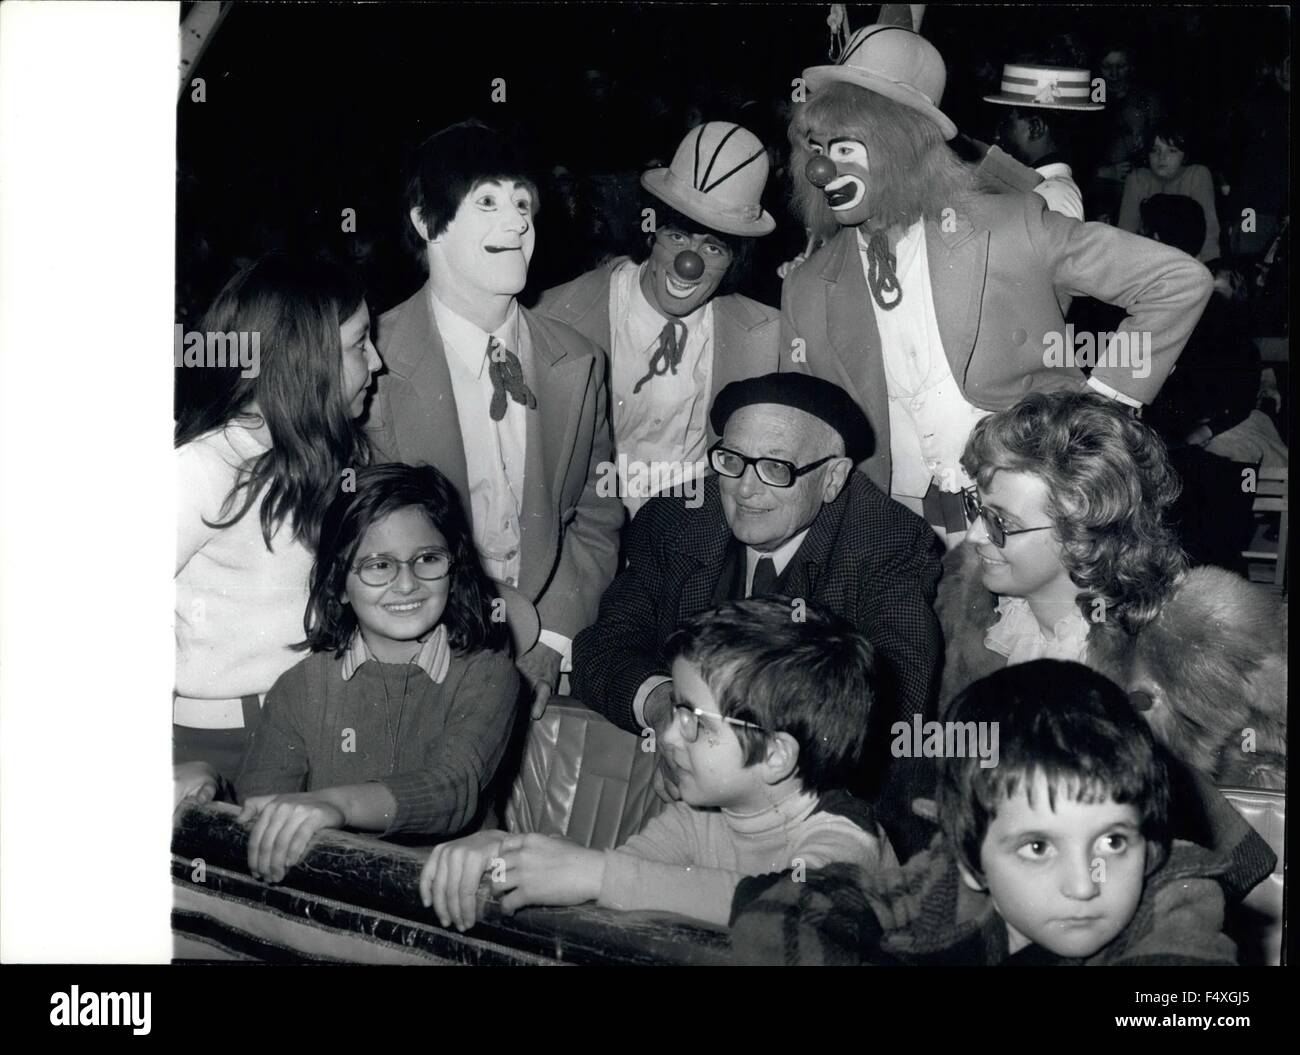 1968 - Old Socialist leader Pietro Nenni, 82, forgot for an evening the political troubles, was a simple great-grandfather and accompanied his three great-grand-children to attend to the performance of the American Circus that is playing now in Rome. Photo shows sen. Pietro Nenni and his great-grand-children Flavia, Fabie, Fulvo and Lina welcomed by the clowns. © Keystone Pictures USA/ZUMAPRESS.com/Alamy Live News Stock Photo